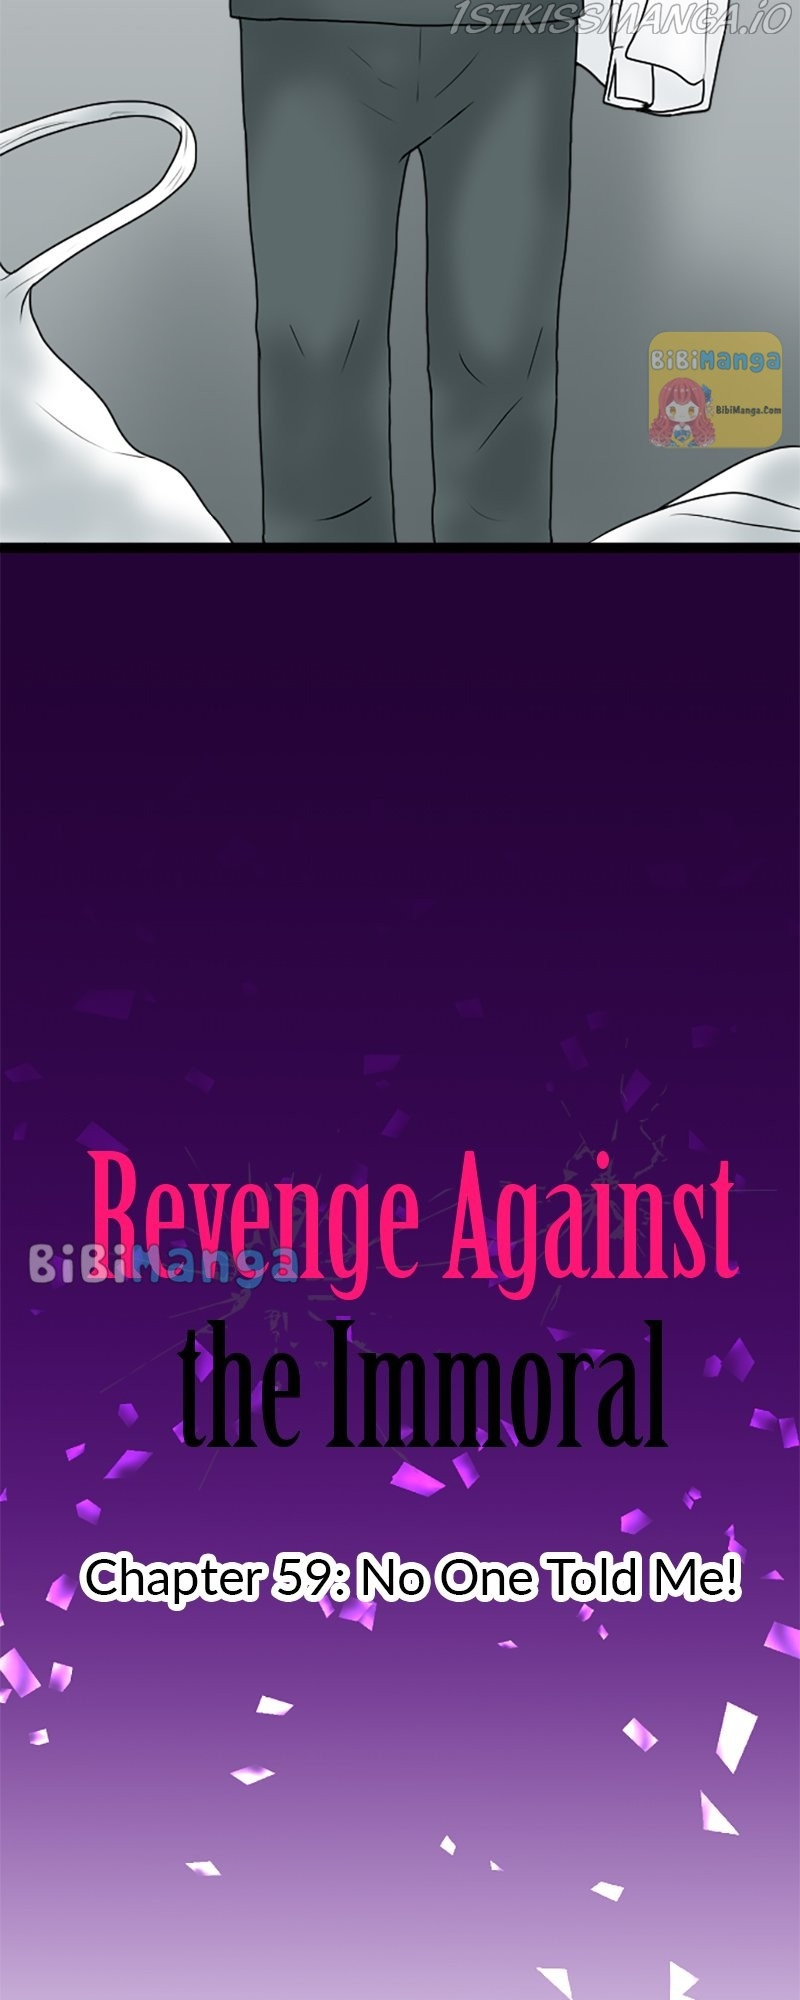 Revenge Against The Immoral - Page 2